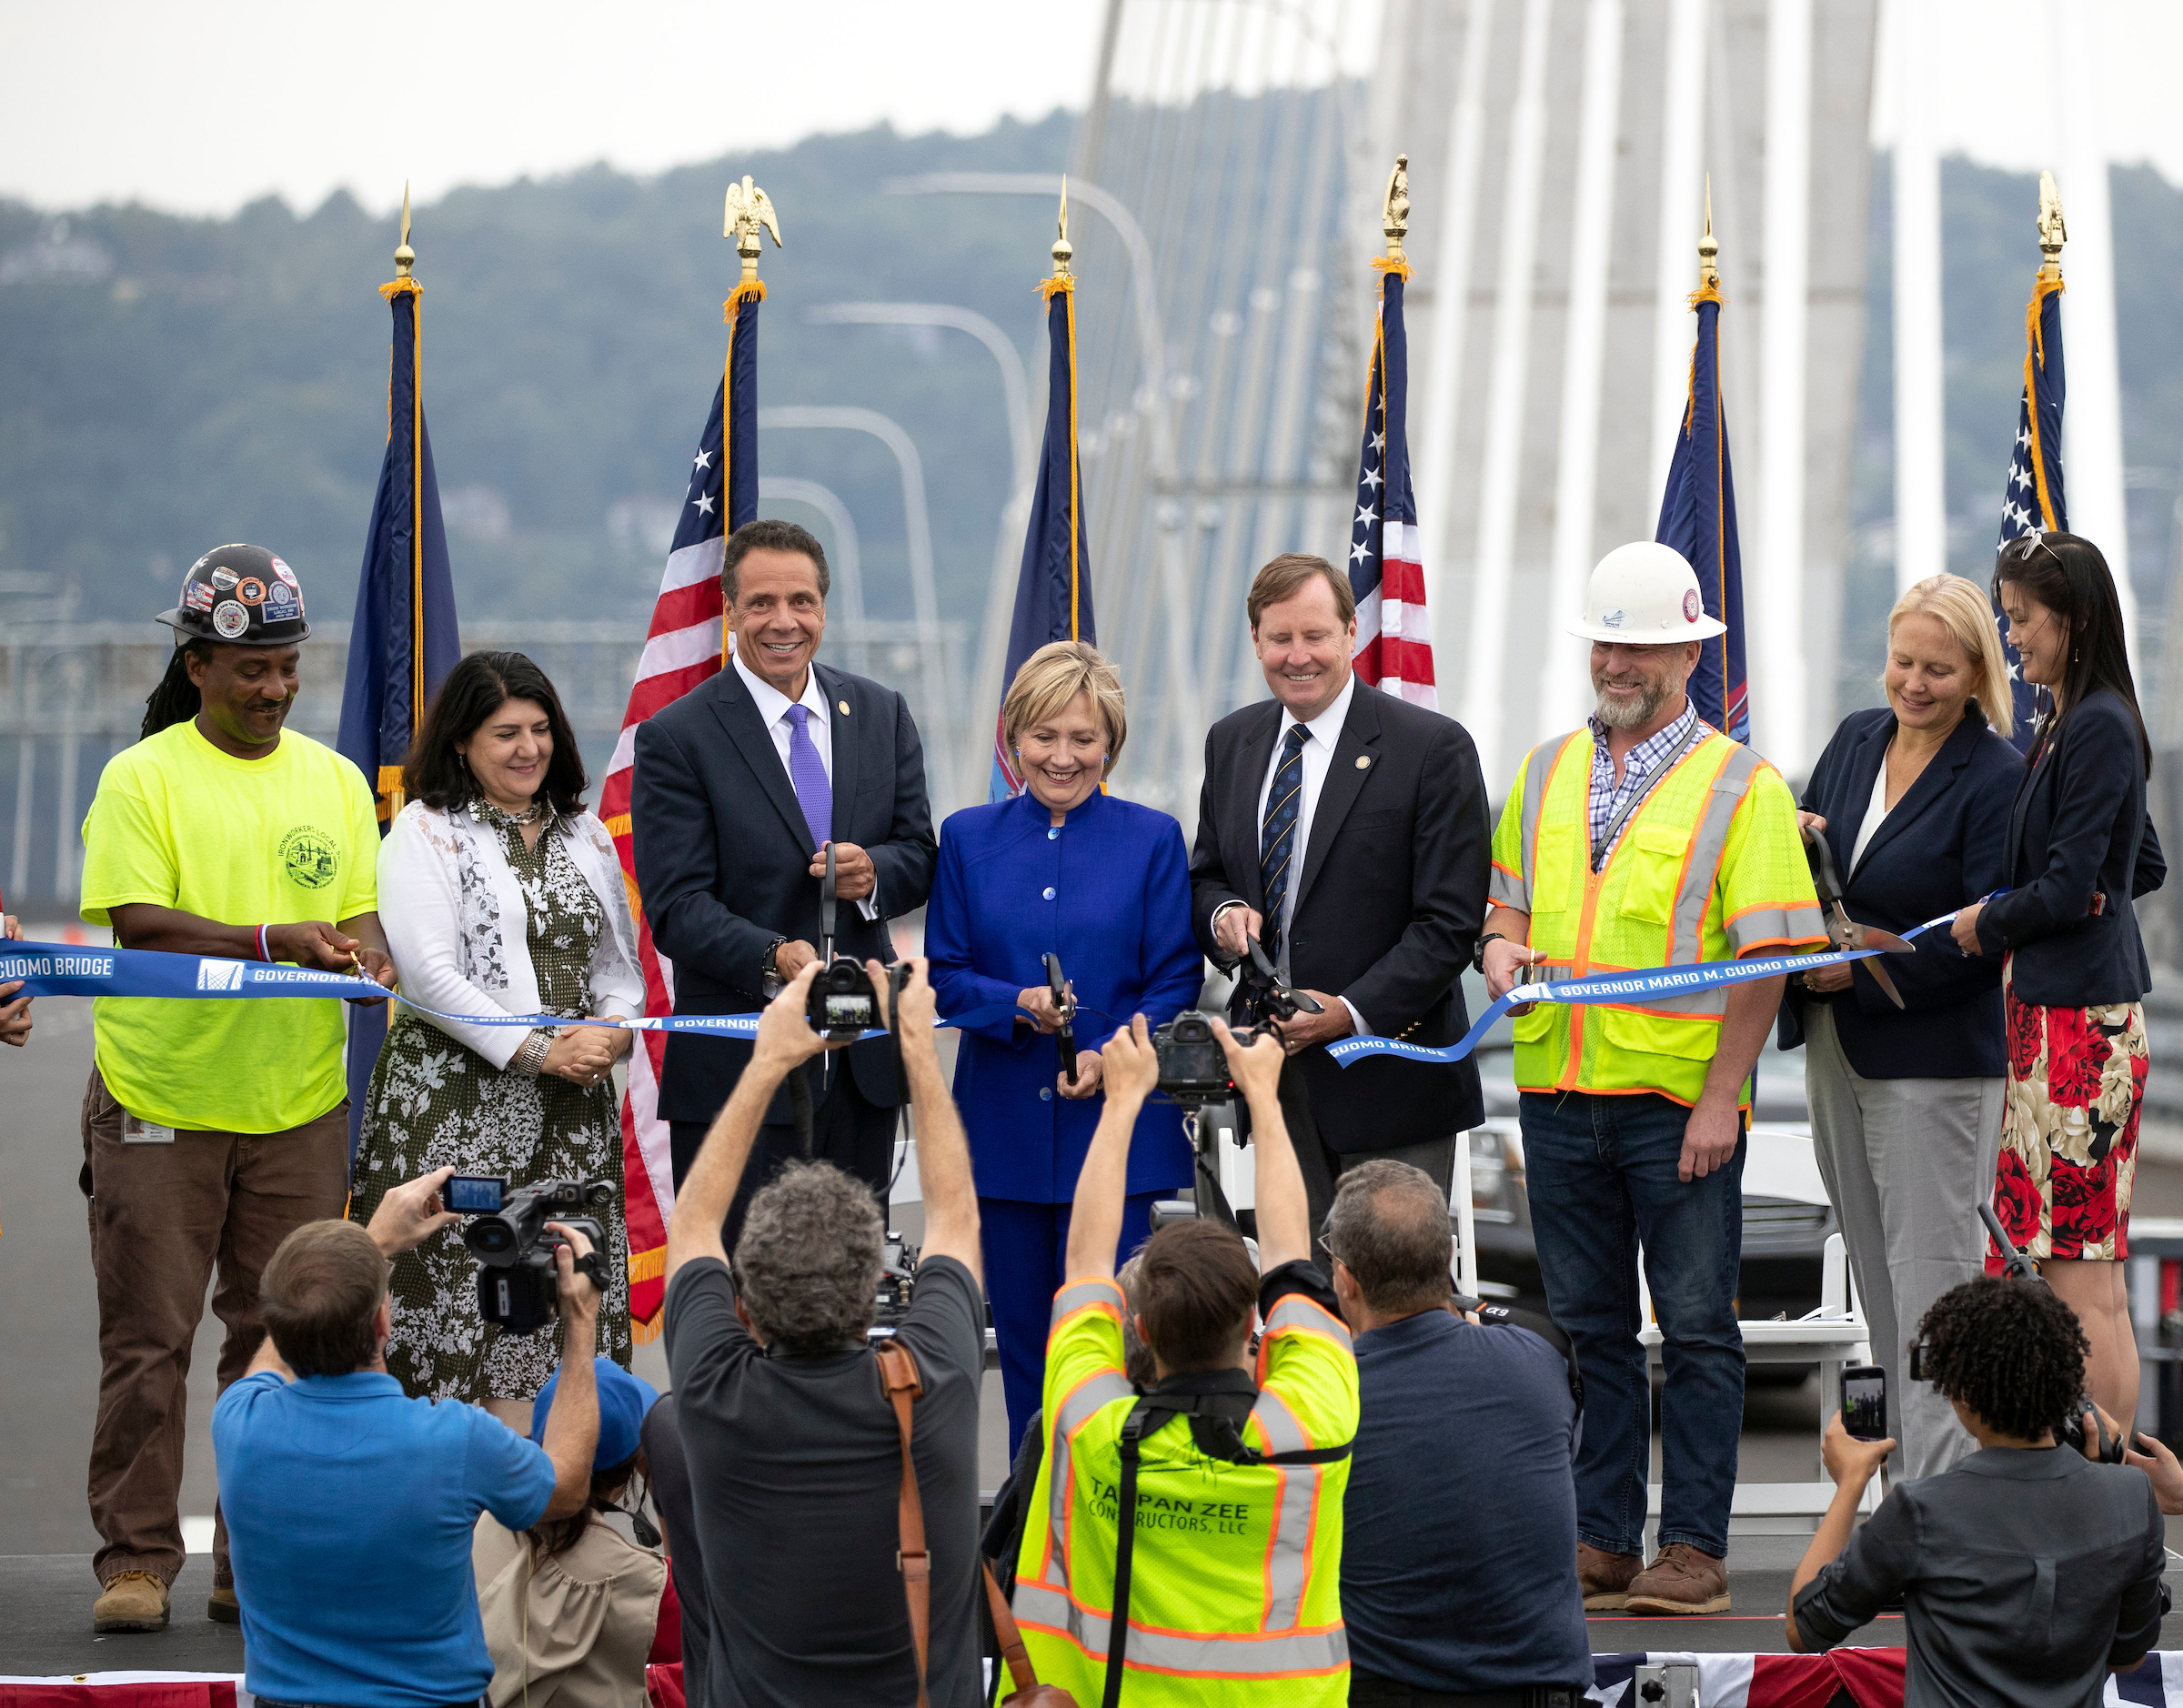 September 7, 2018 - Tarrytown, NY - Governor Andrew M. Cuomo announces the Grand Opening of the second span of the Governor Mario M. Cuomo Bridge. (Mike Groll/Office of Governor Andrew M. Cuomo)